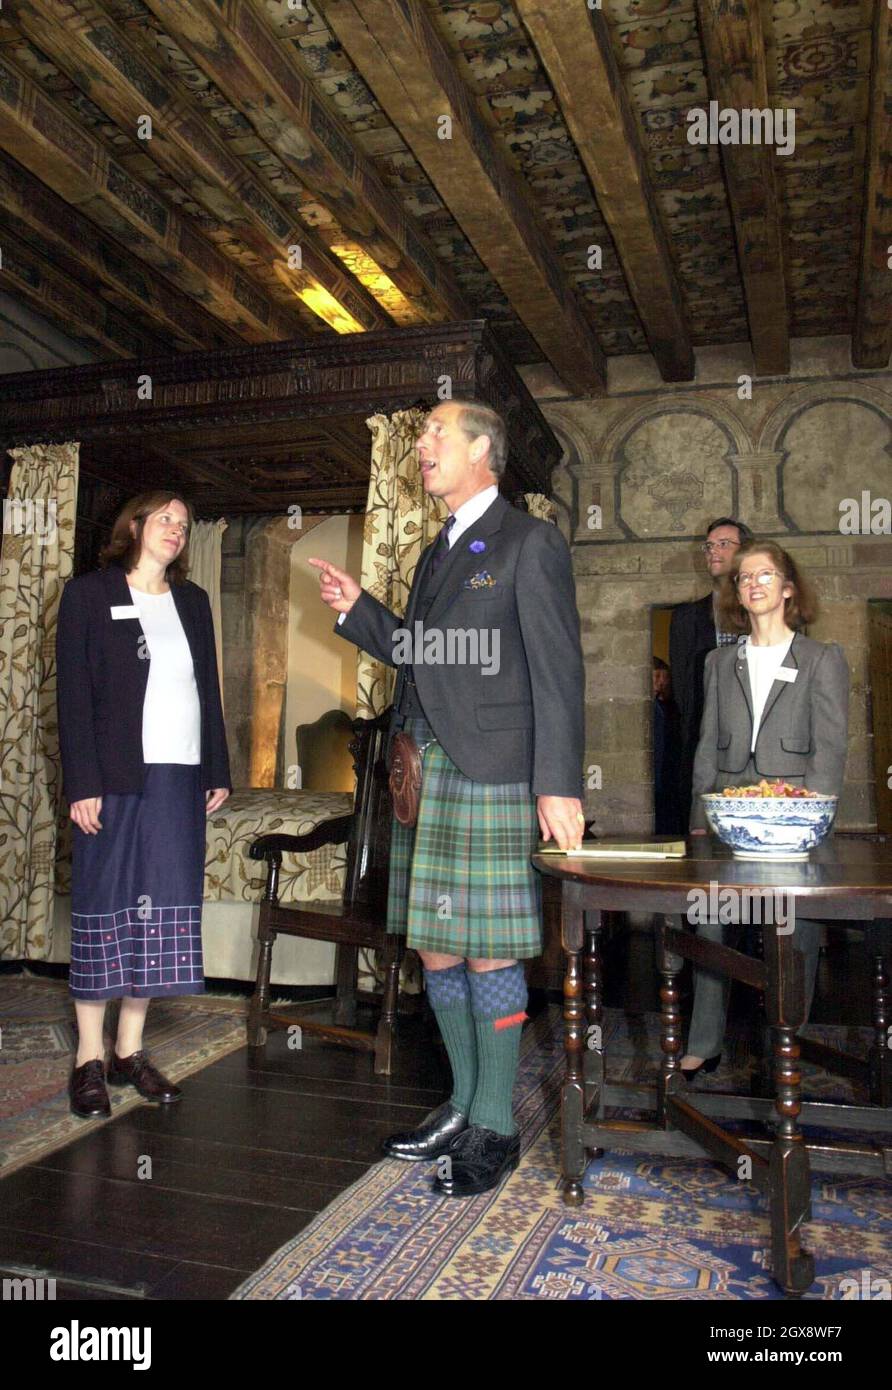 The Prince of Wales walks through and examines The Real Mary King's Close at the Royal Mile, Edinburgh. The Prince of Wales visited some of Scotland's top visitor attractions today in a bid to raise the profile of the country's tourism industry. Â©Anwar Hussein/allaction.co.uk  Stock Photo